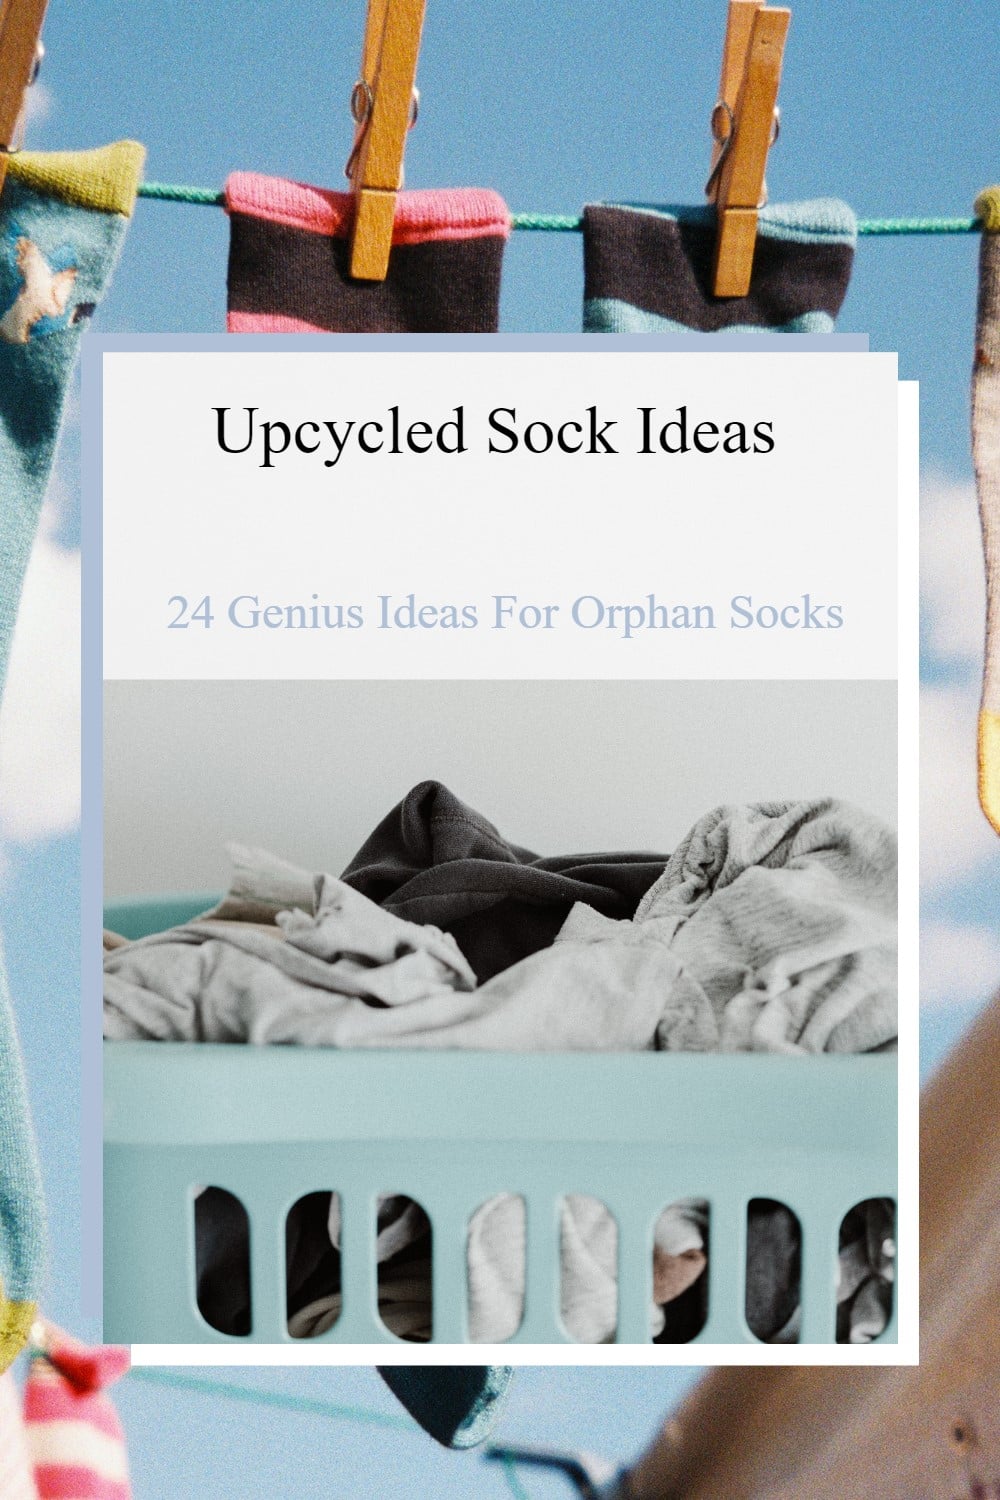 If you have single, spare socks these 24 upcycled sock ideas will amaze you and have you wishing you had more orphan socks in your drawers. Genus! via @repurposedlife